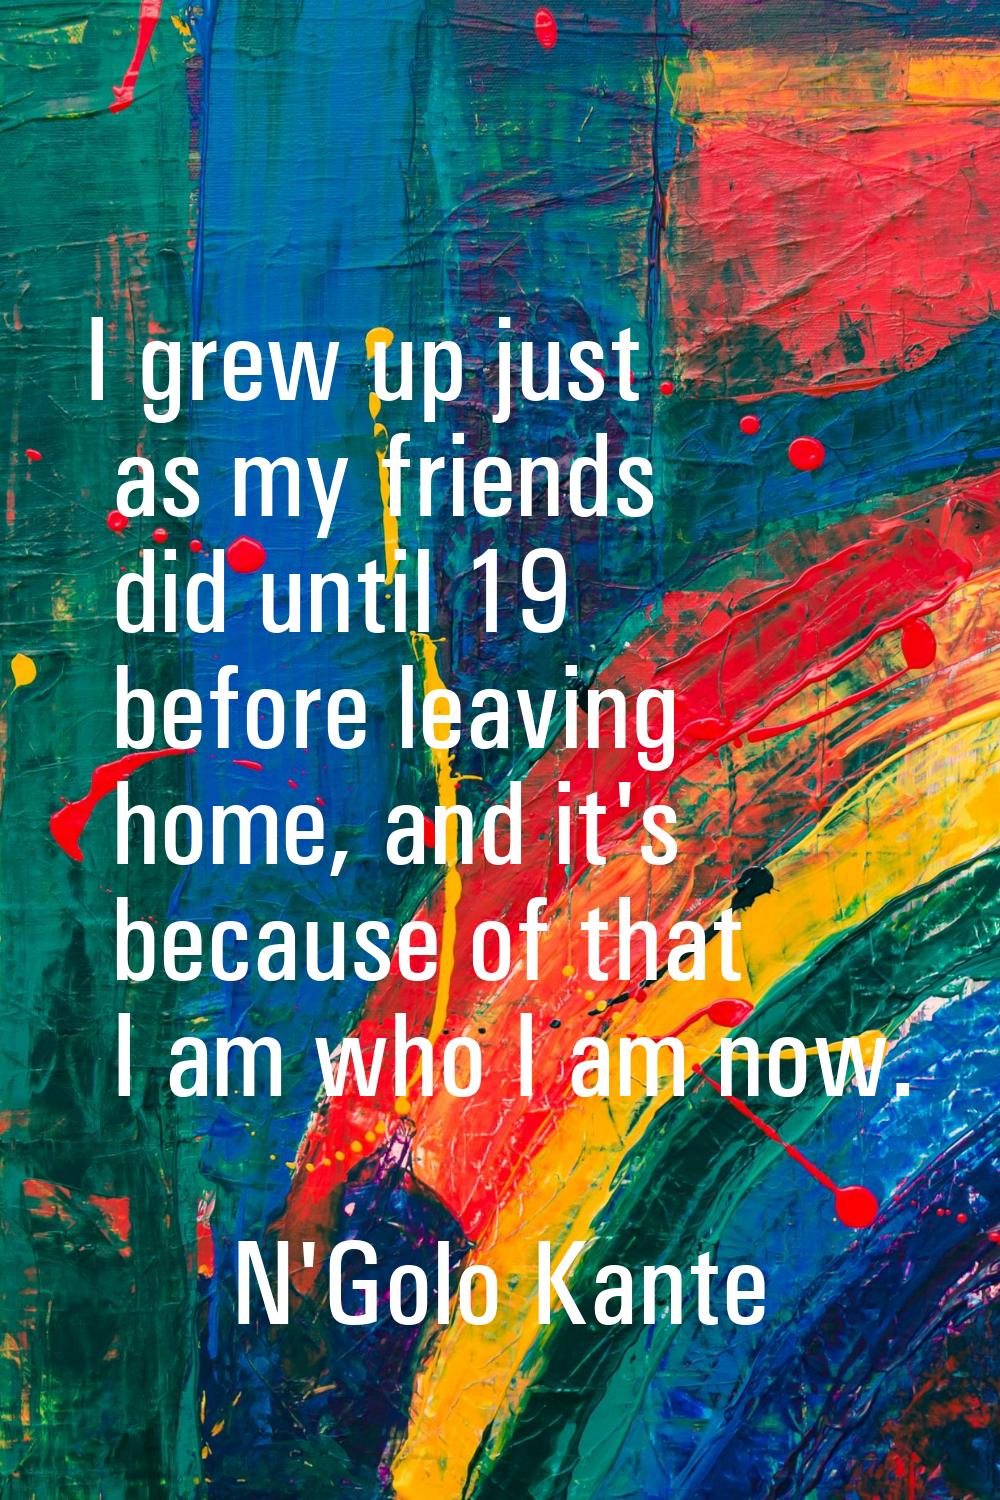 I grew up just as my friends did until 19 before leaving home, and it's because of that I am who I 